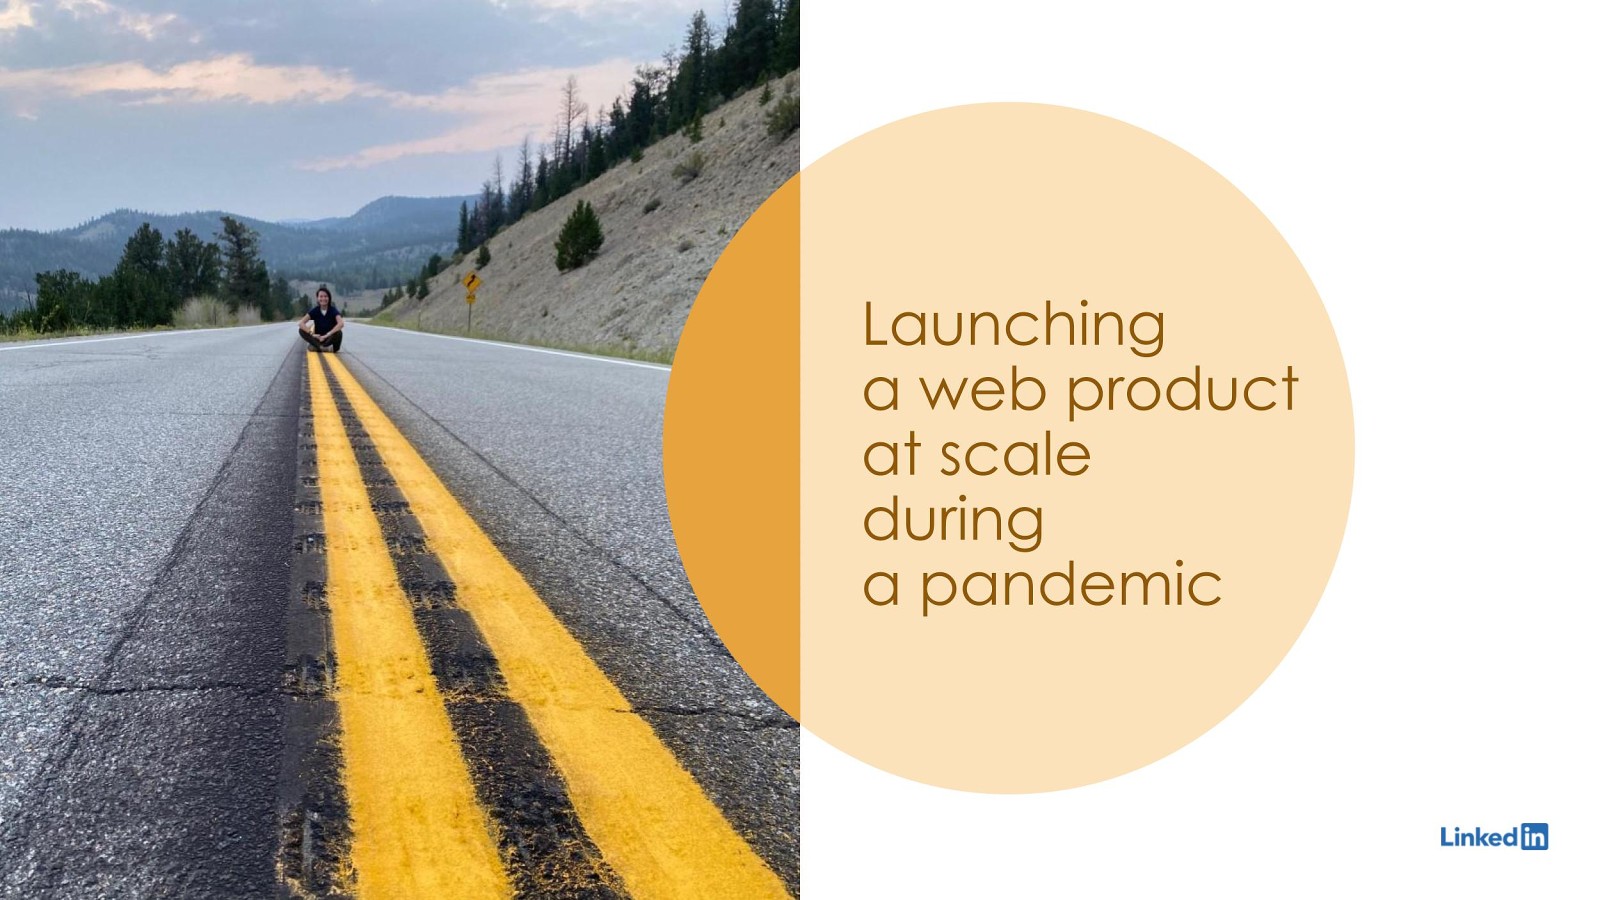 Launching an enterprise web product at scale during the COVID-19 pandemic